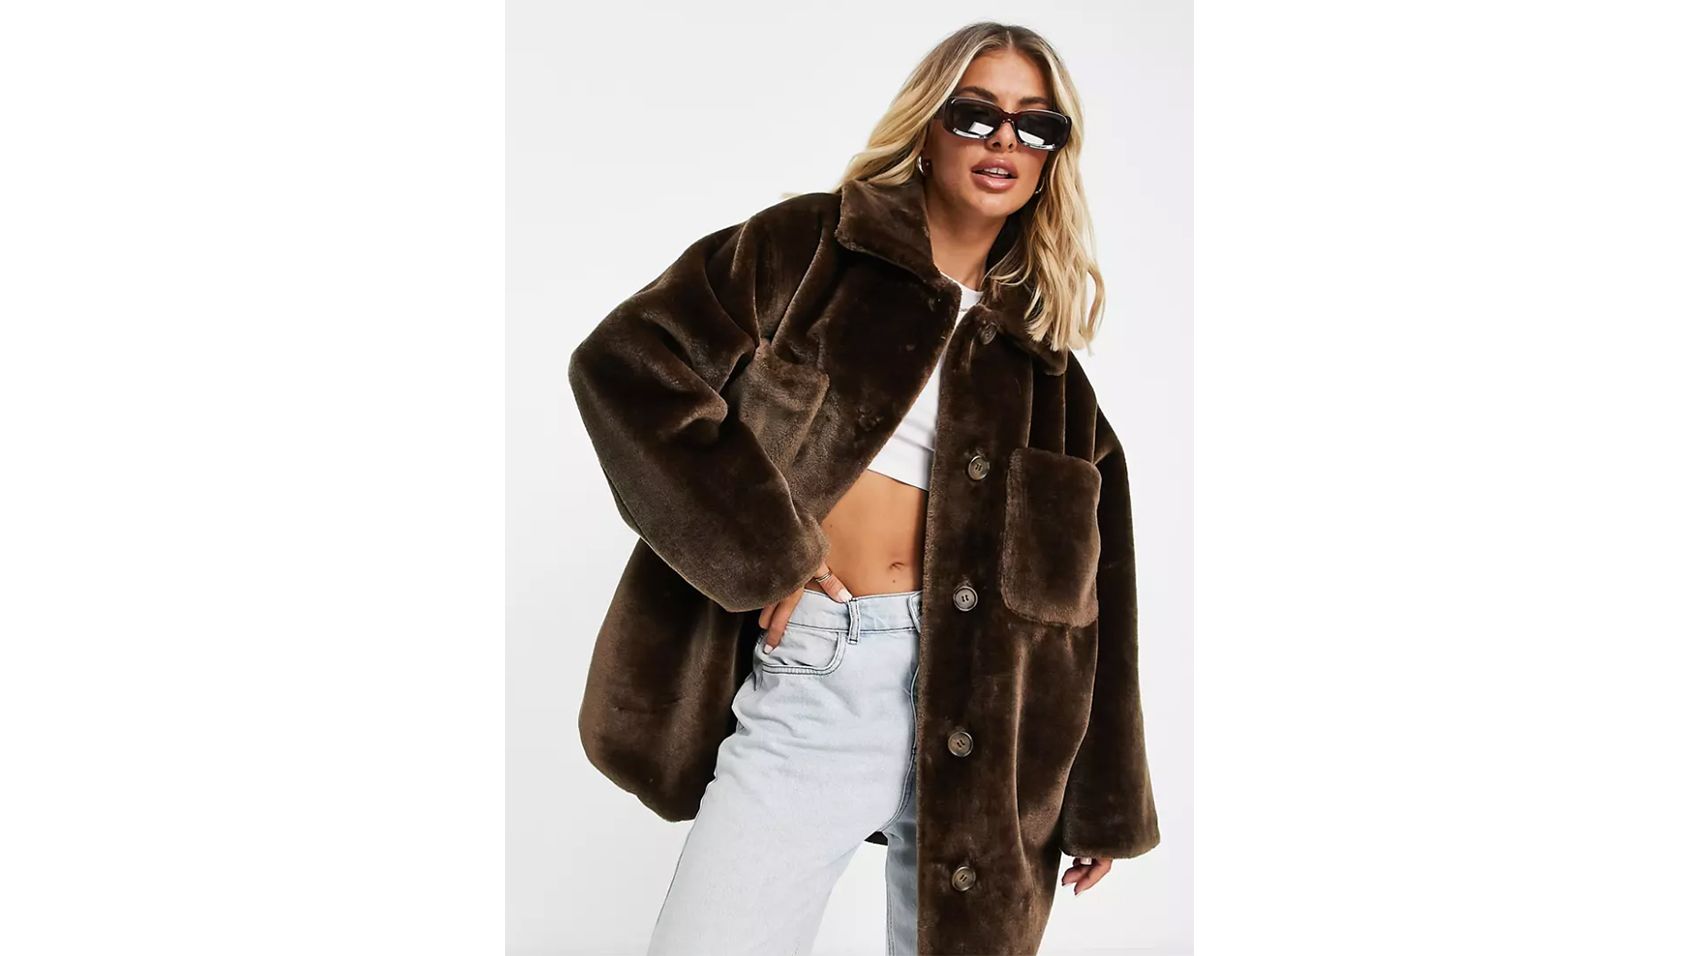 21 Super Chic Short Fur Coat Outfits To Feel Warm In Winter